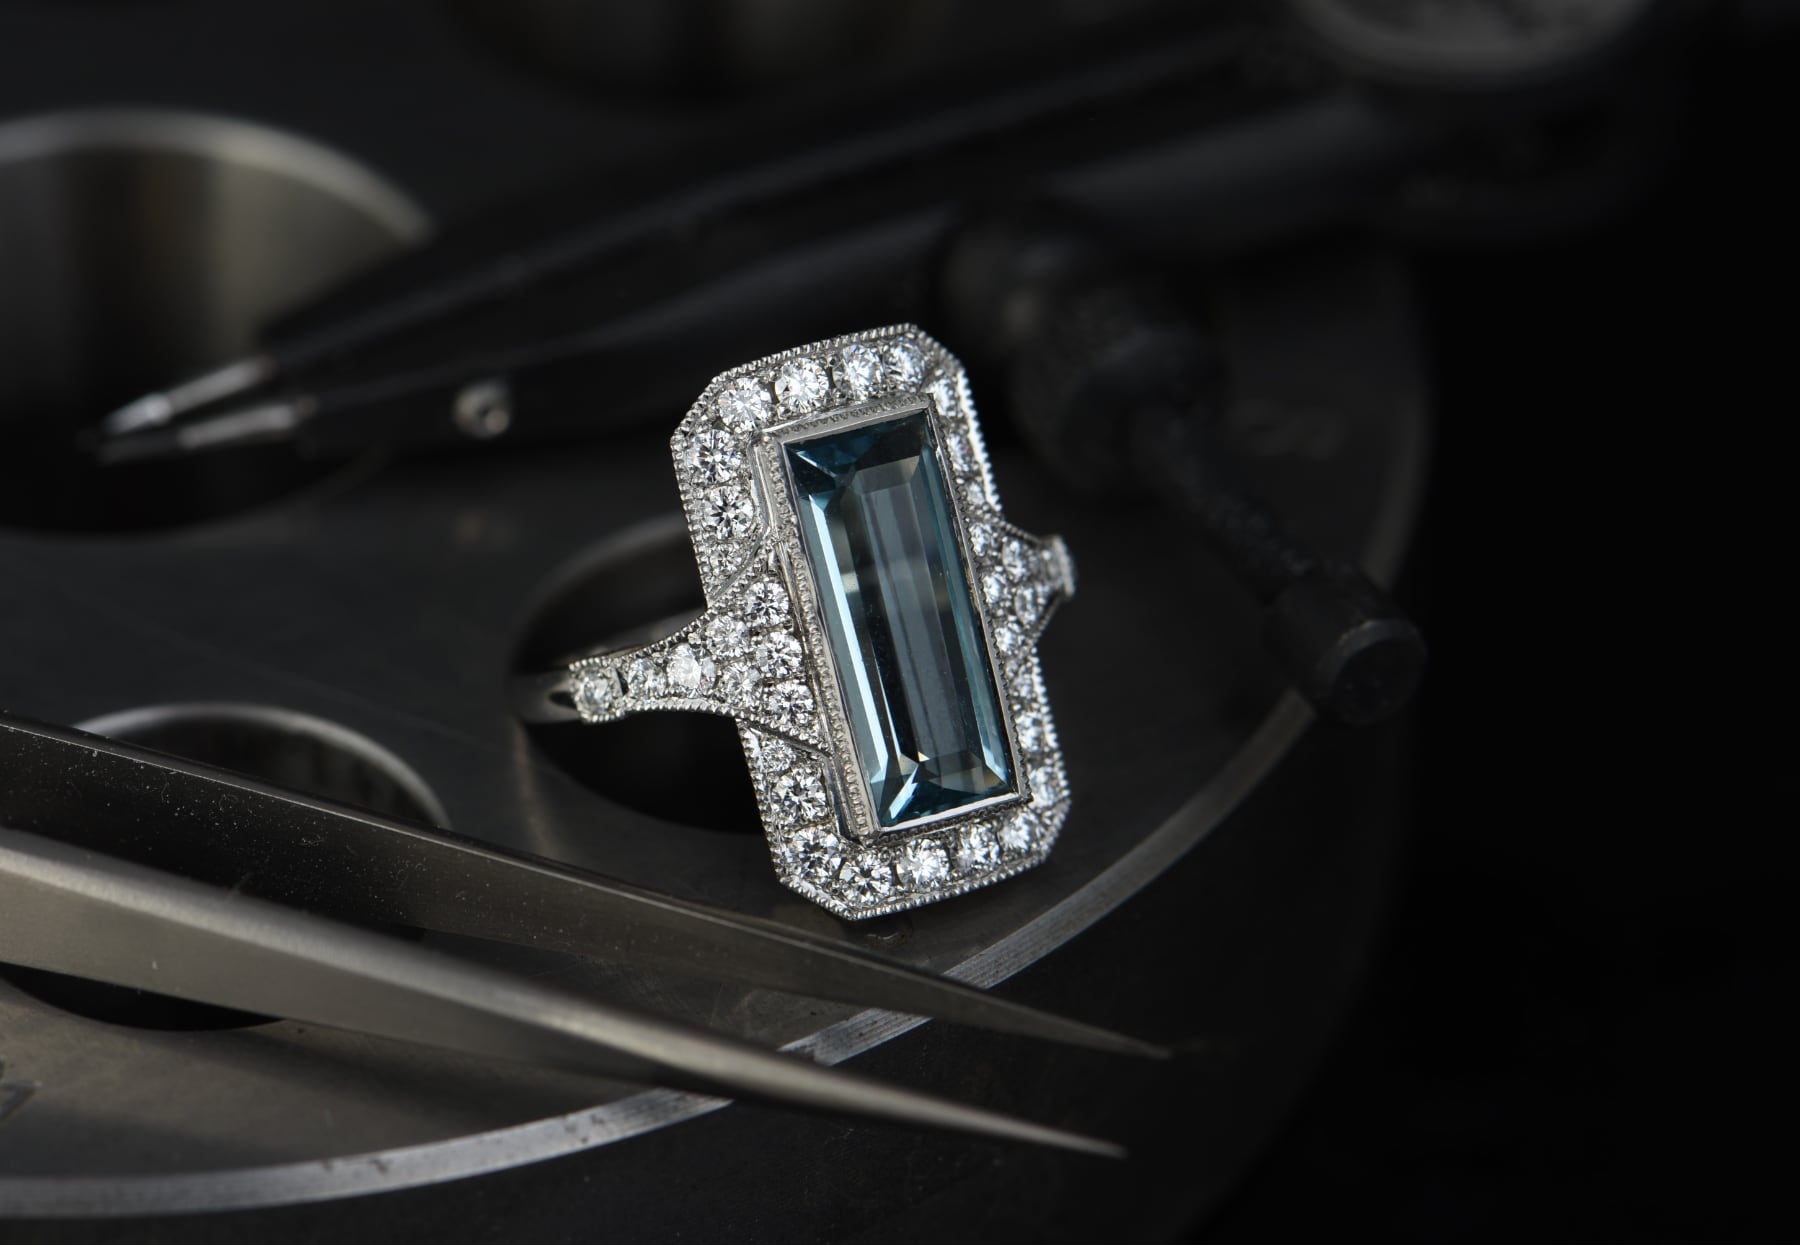 Art deco style ring with baguette shaped aquamarine and white diamond surround